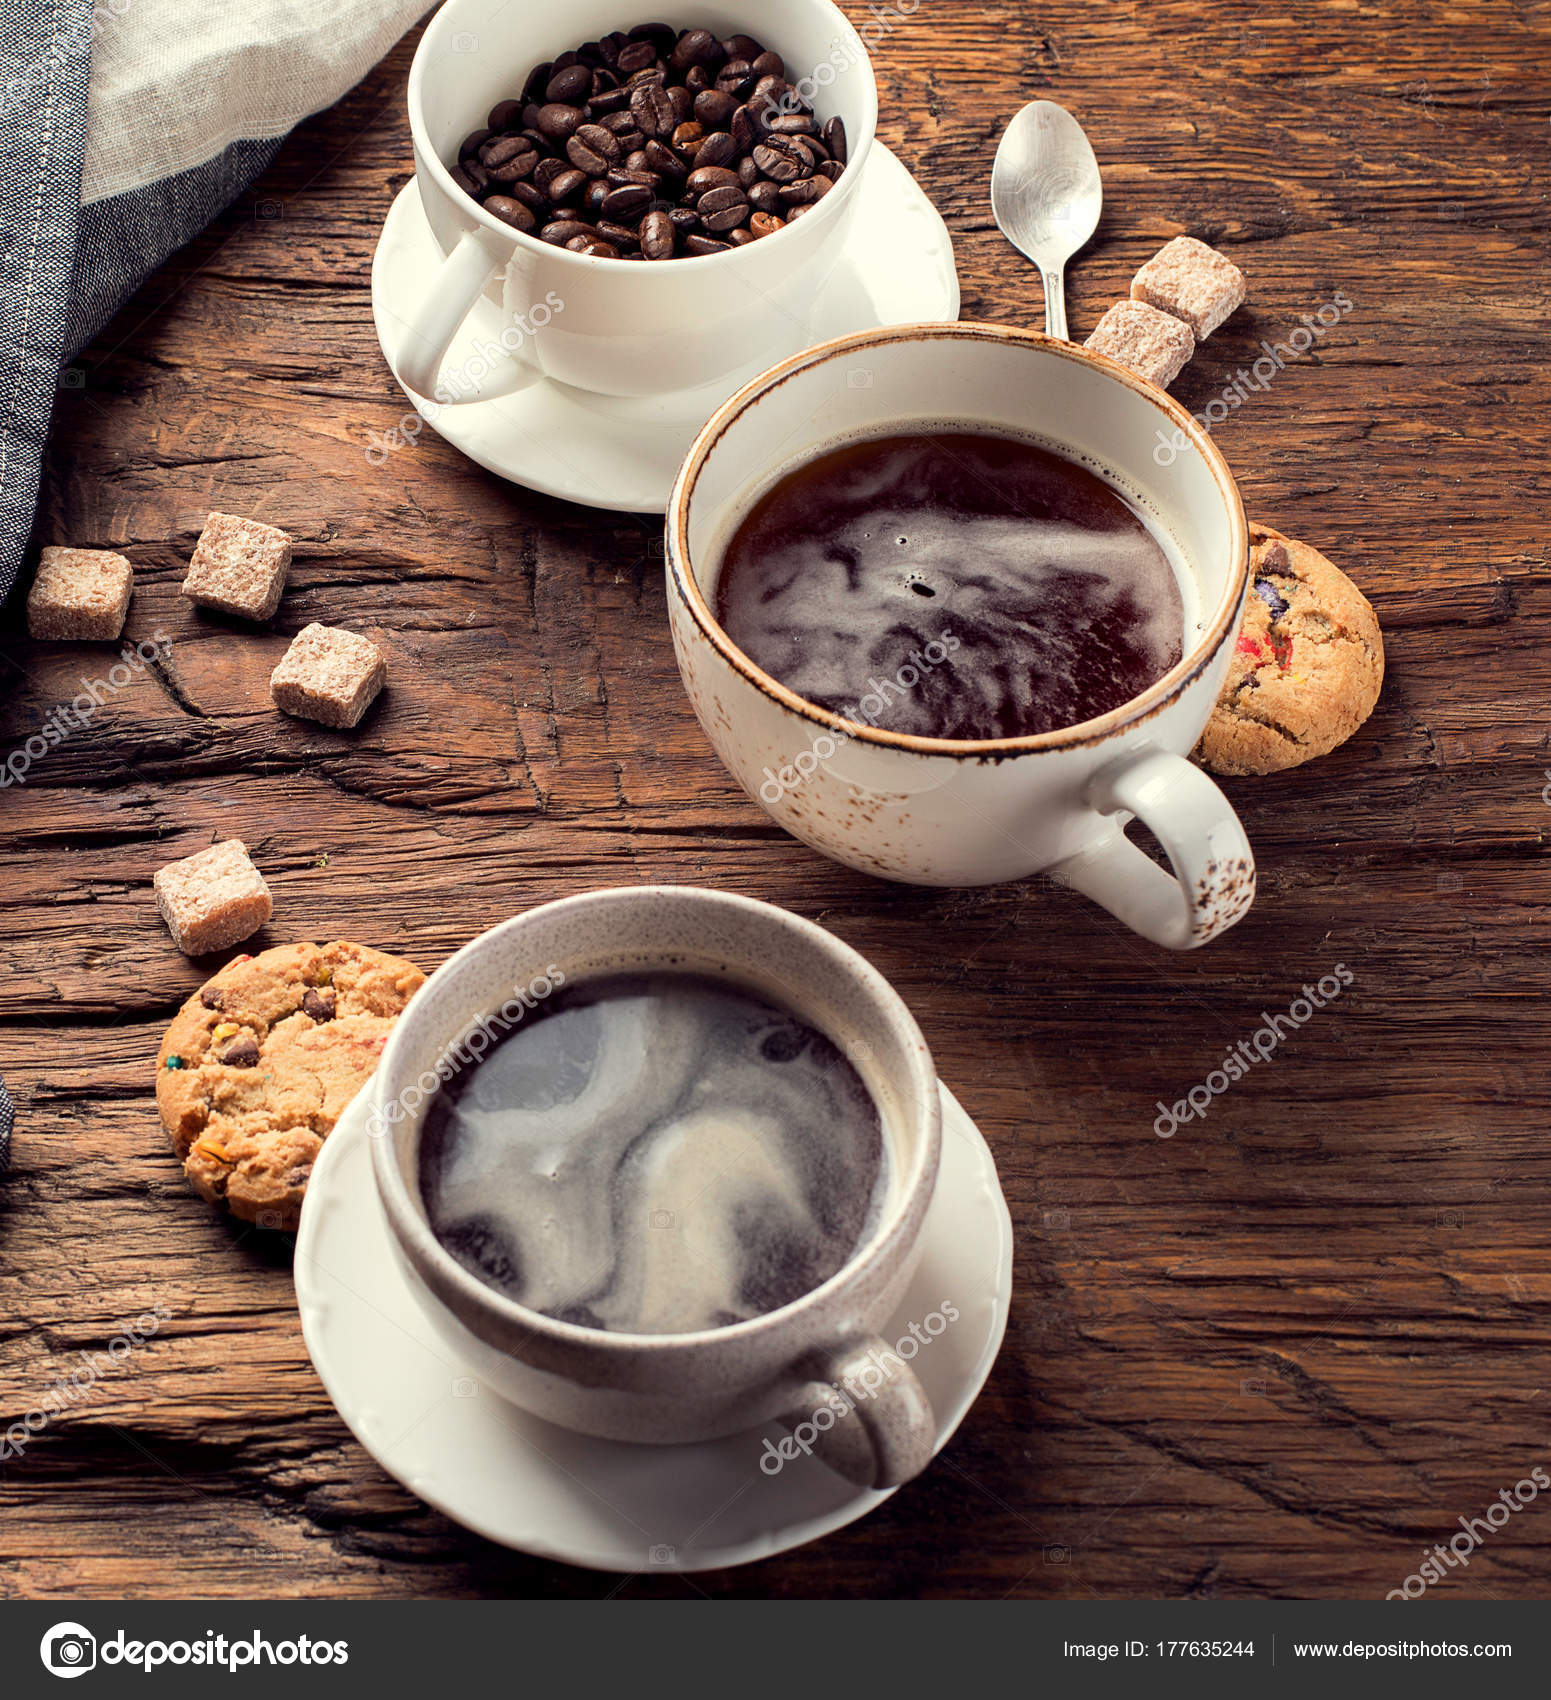 Coffee cups on a rustic background. — Stock Photo © bit245 #177635244